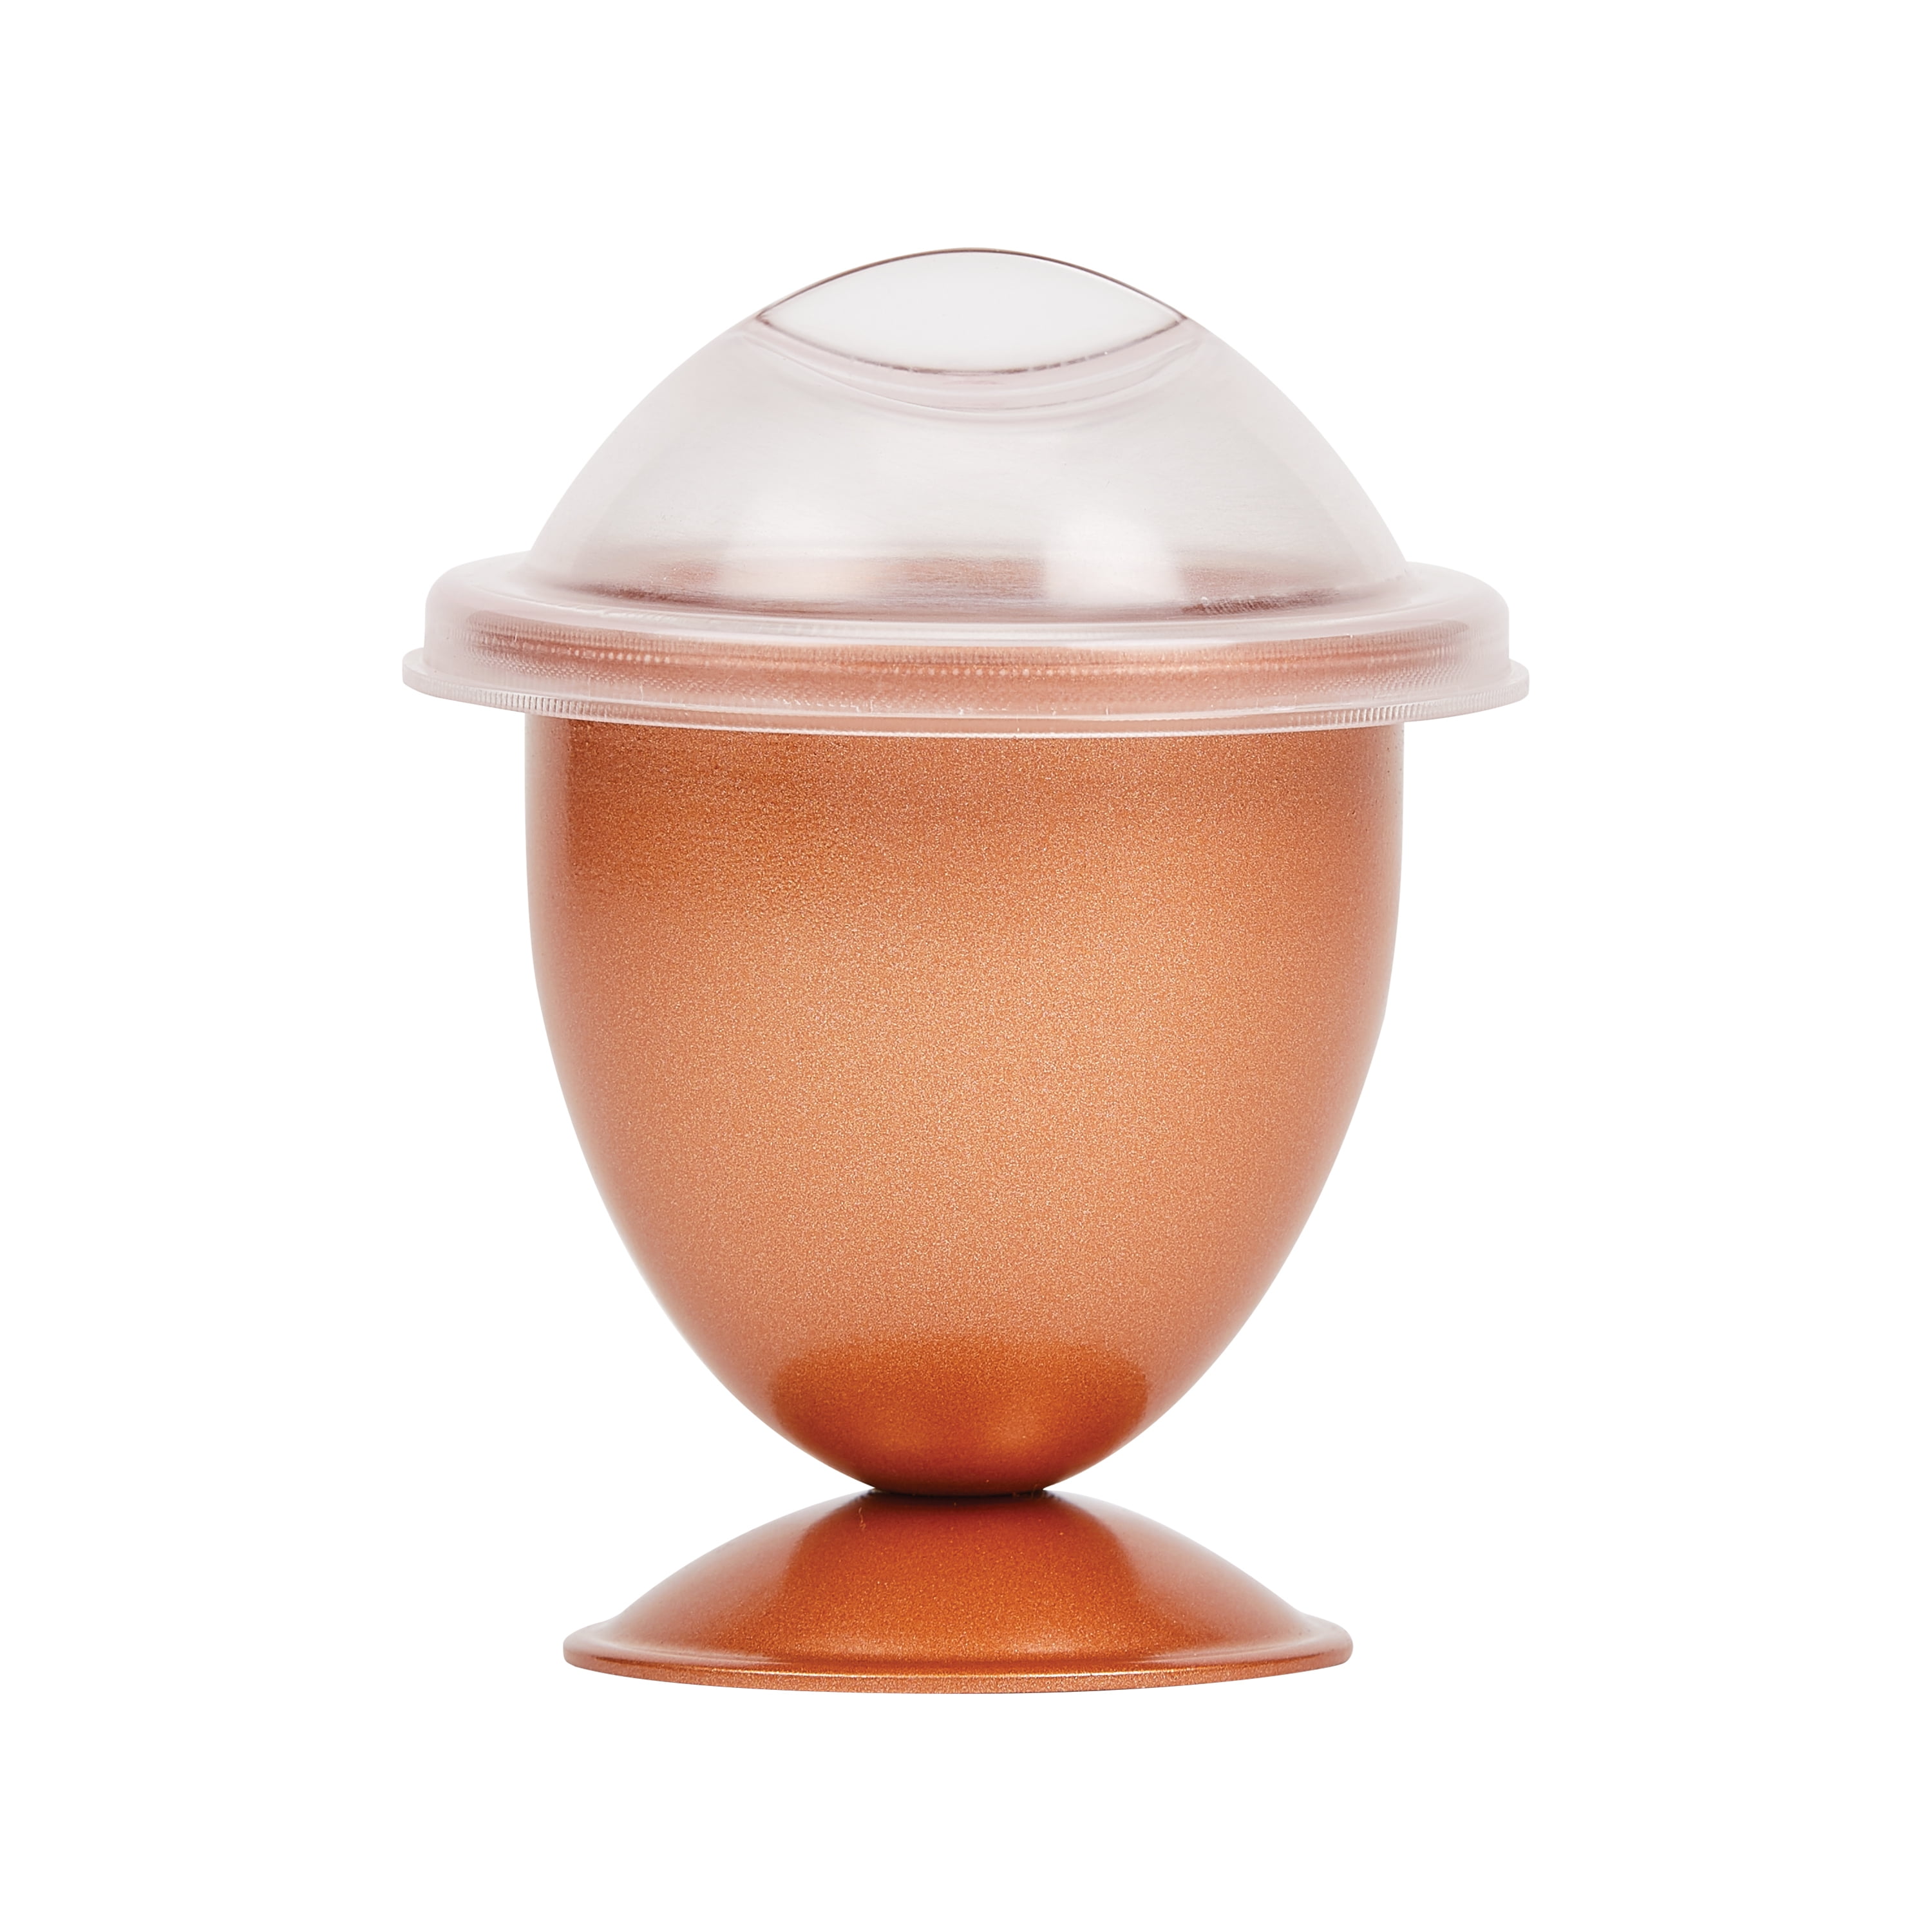 Copper Chef Deluxe Perfect Egg Maker - Bed Bath & Beyond - 32133836